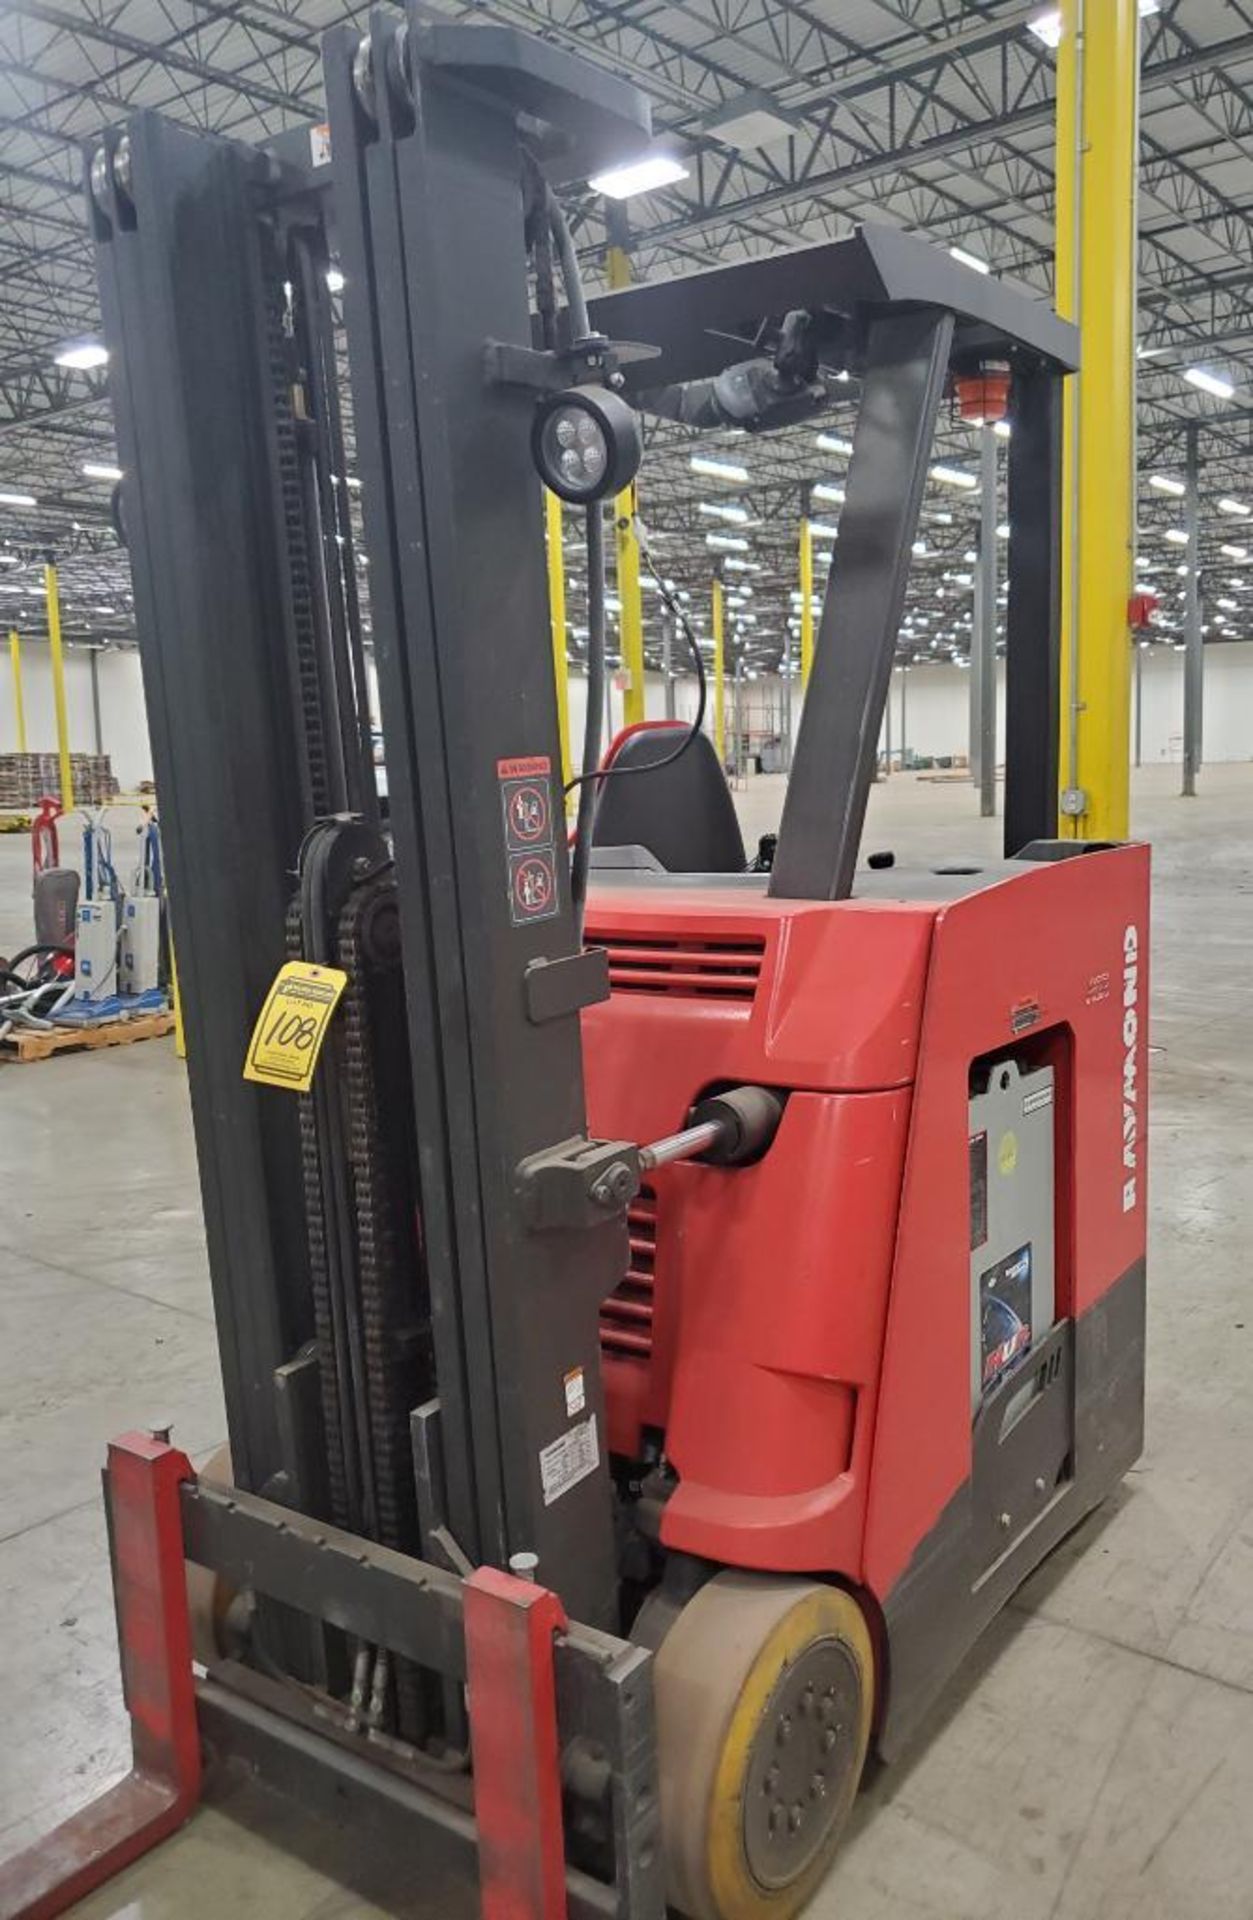 2014 RAYMOND ORDER PICKER; MODEL 415-C35TT, S/N 415-14-44015, WITH IWAREHOUSE MONITOR ATTACHMENT - Image 4 of 7